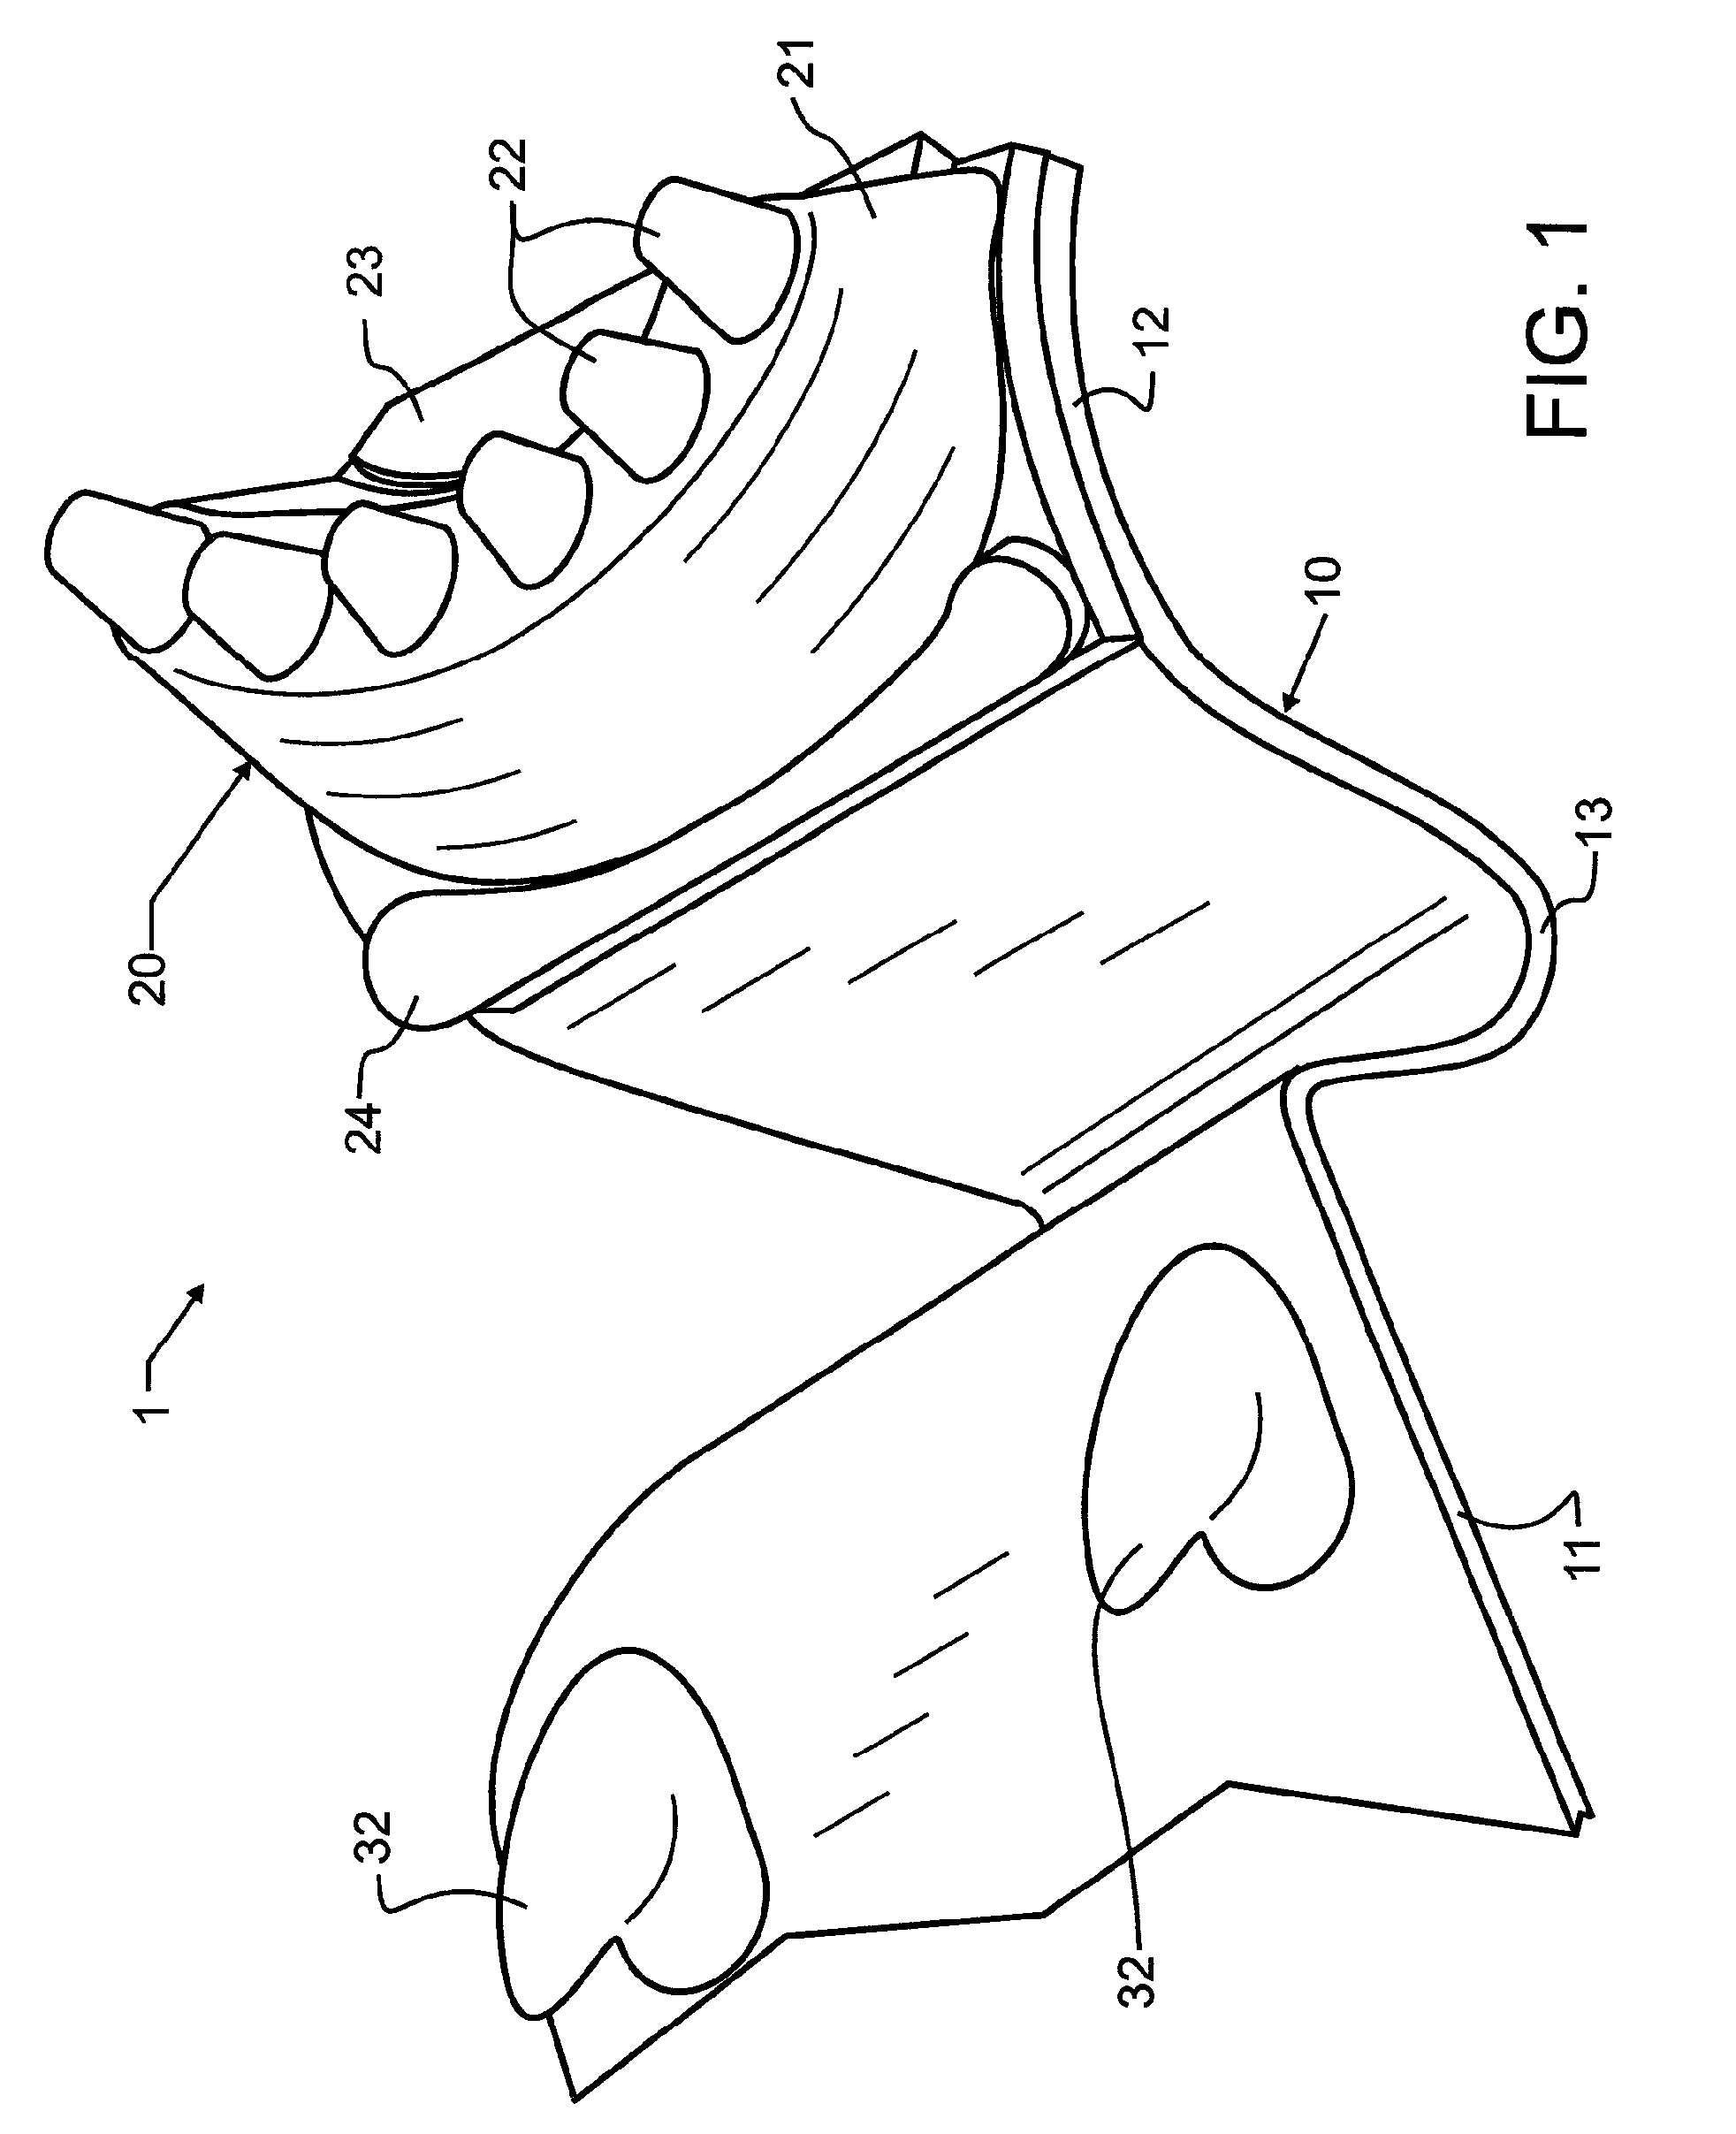 Mechanical massage and traction apparatus